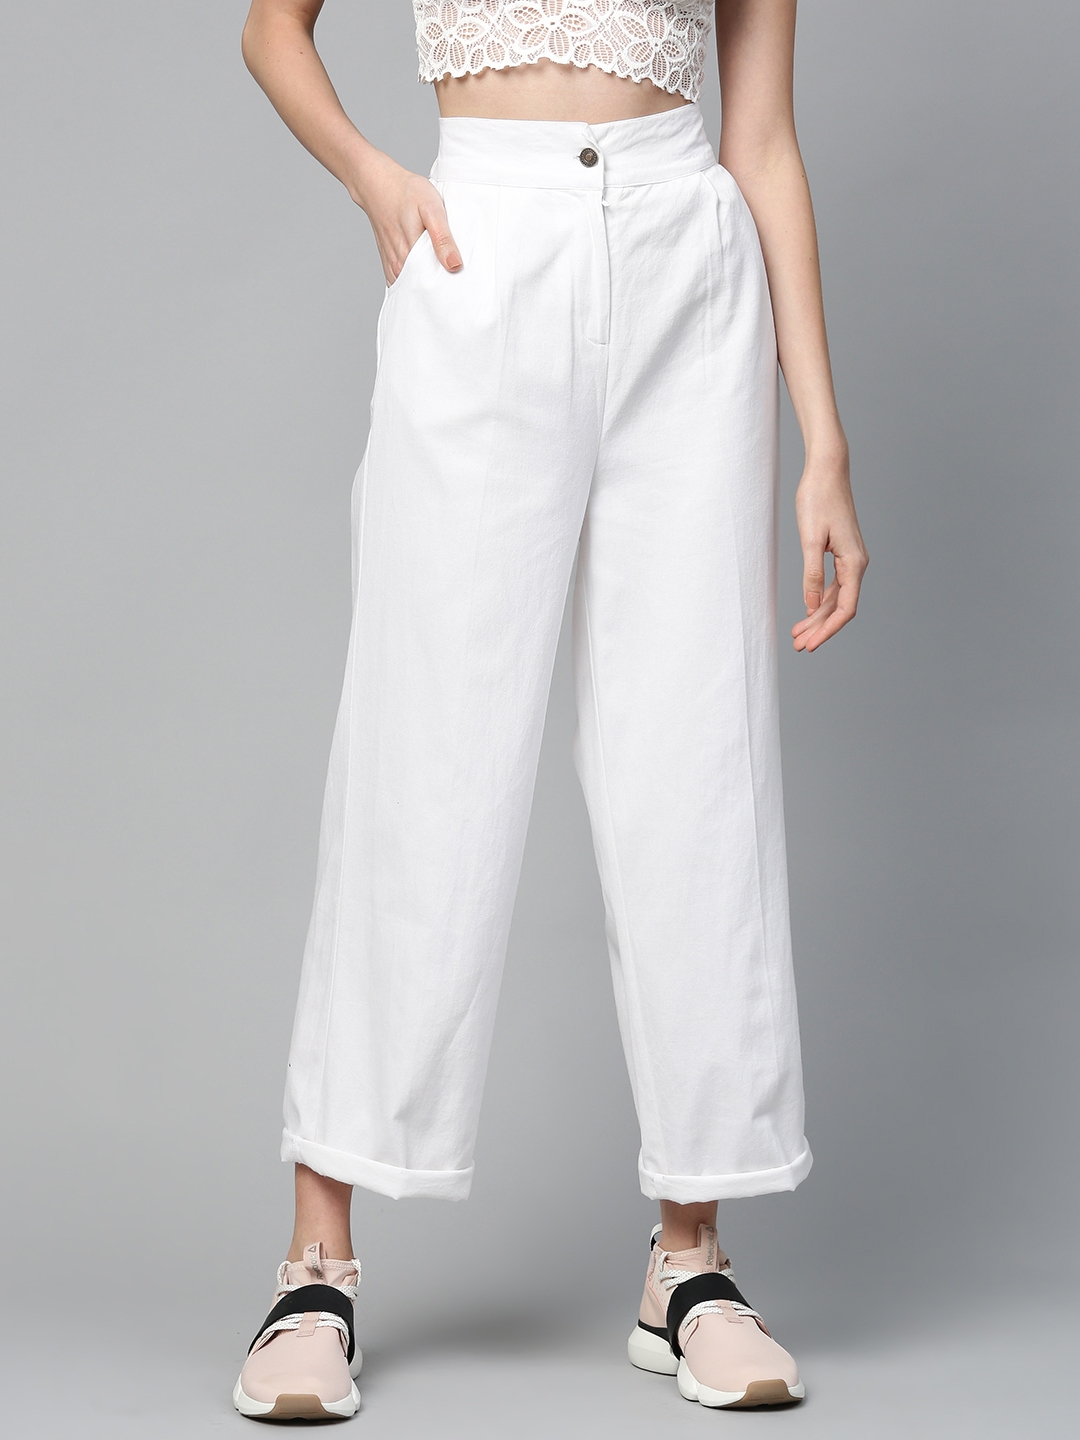 Top 162+ white pants for women latest